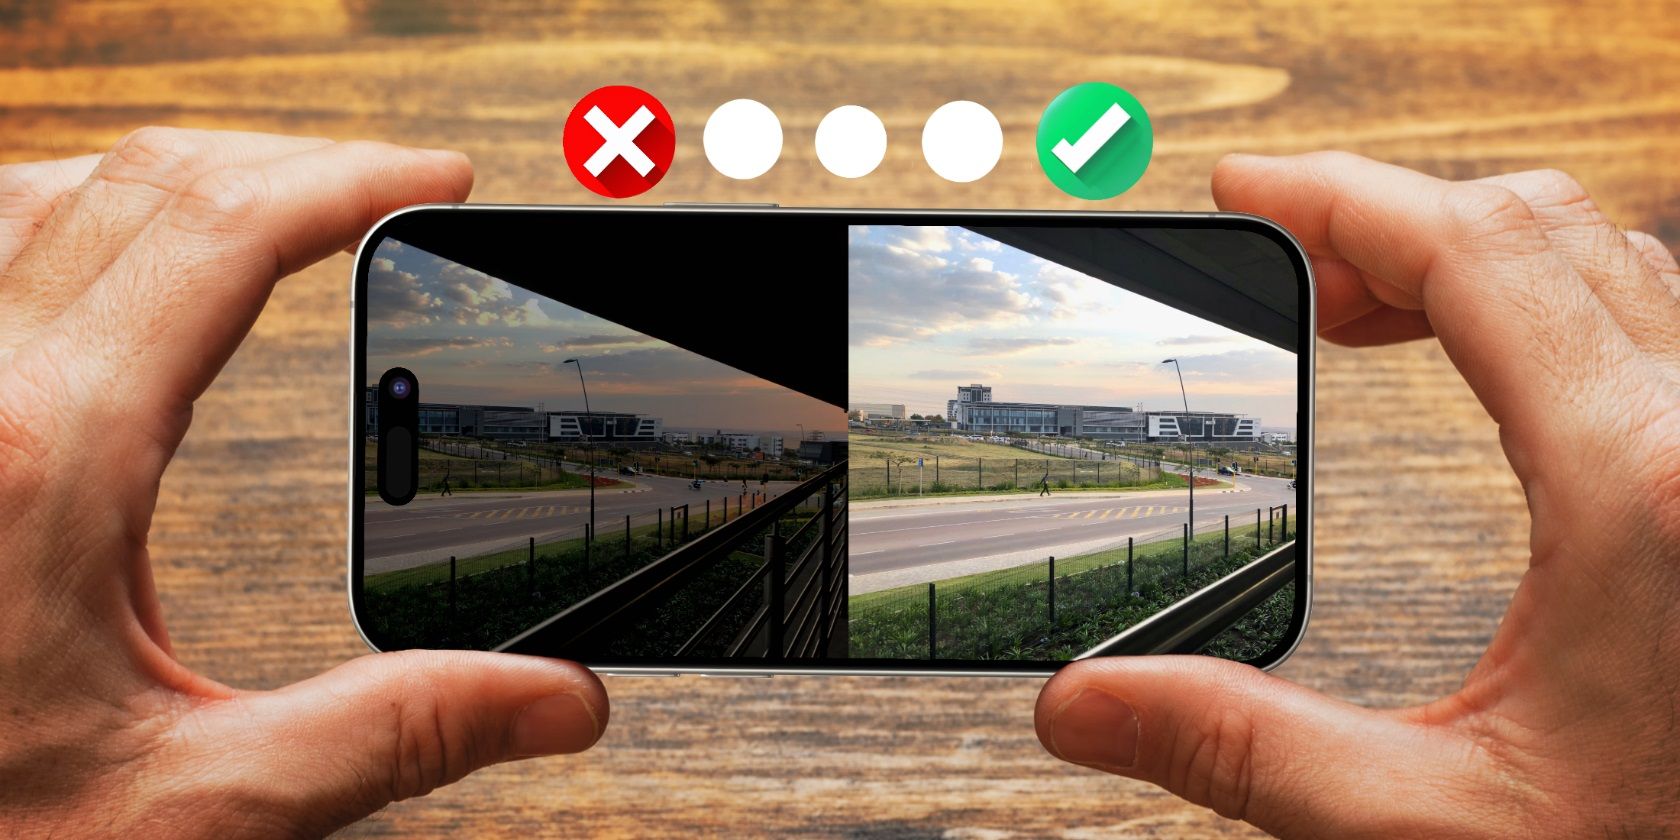 Here's How to Fix Underexposed Images on iPhone and Android